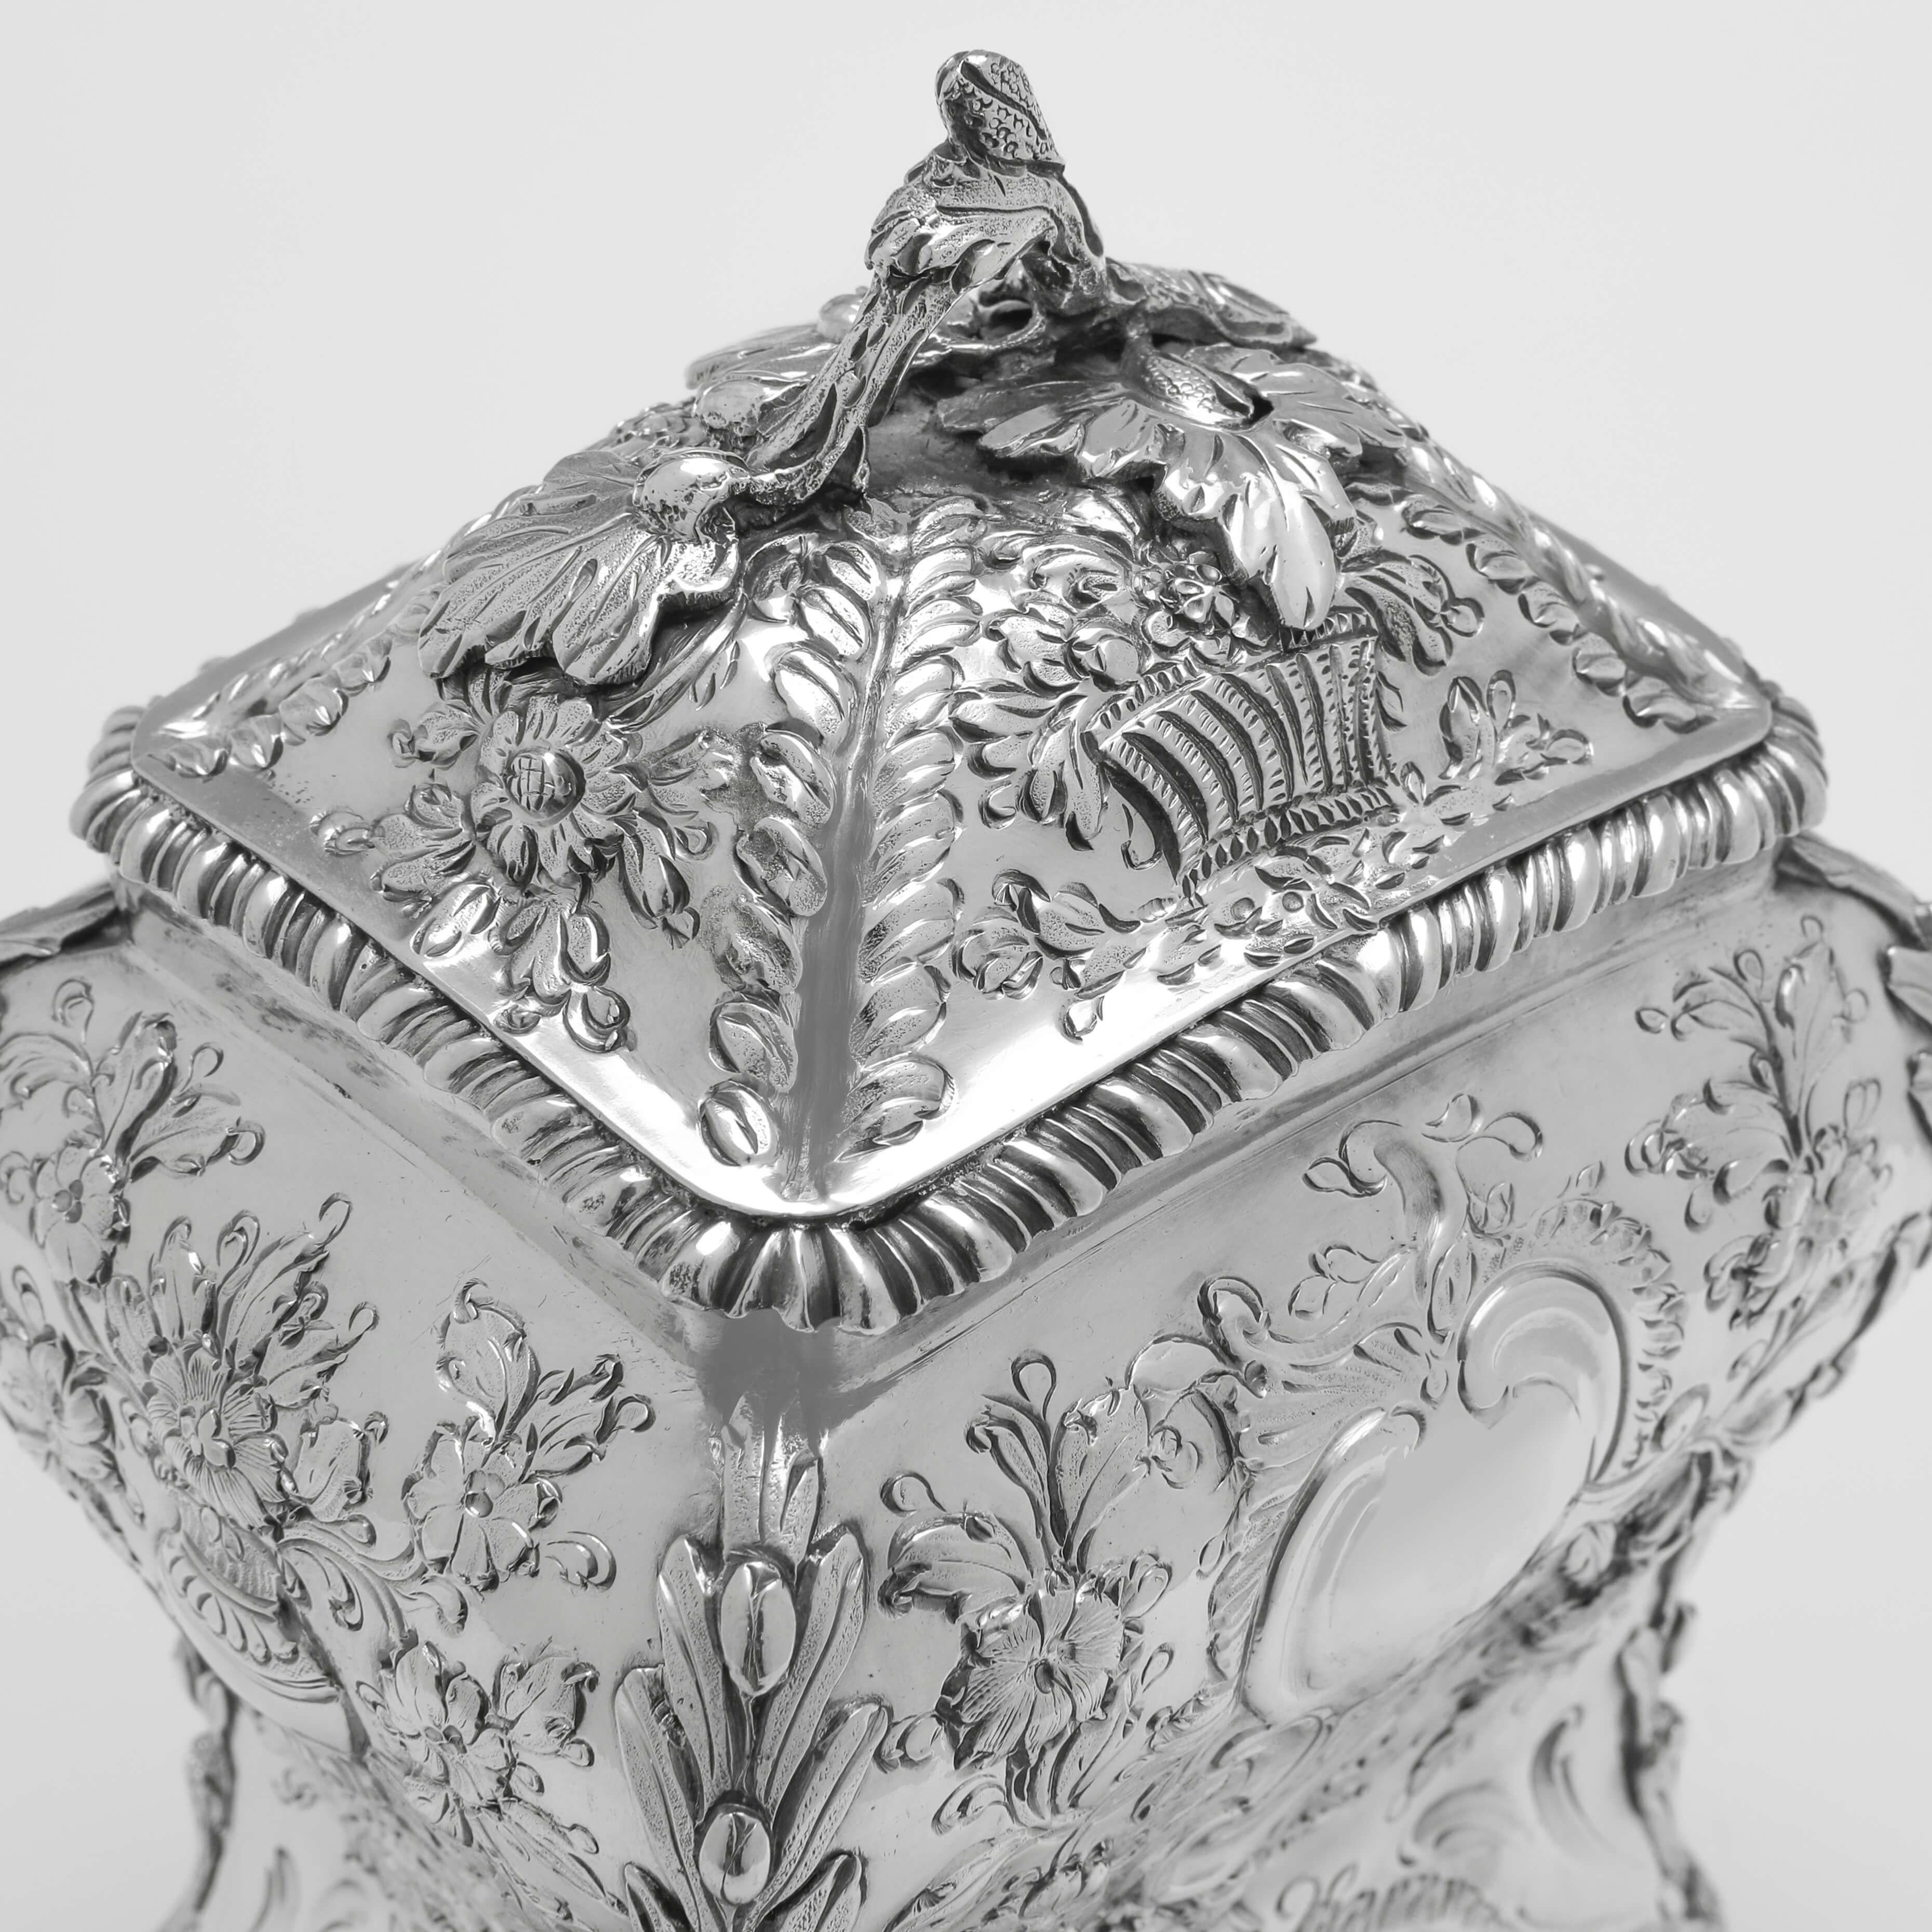 Stunning Rococo Pair of Antique Sterling Silver Tea Caddies, London, 1768 For Sale 2